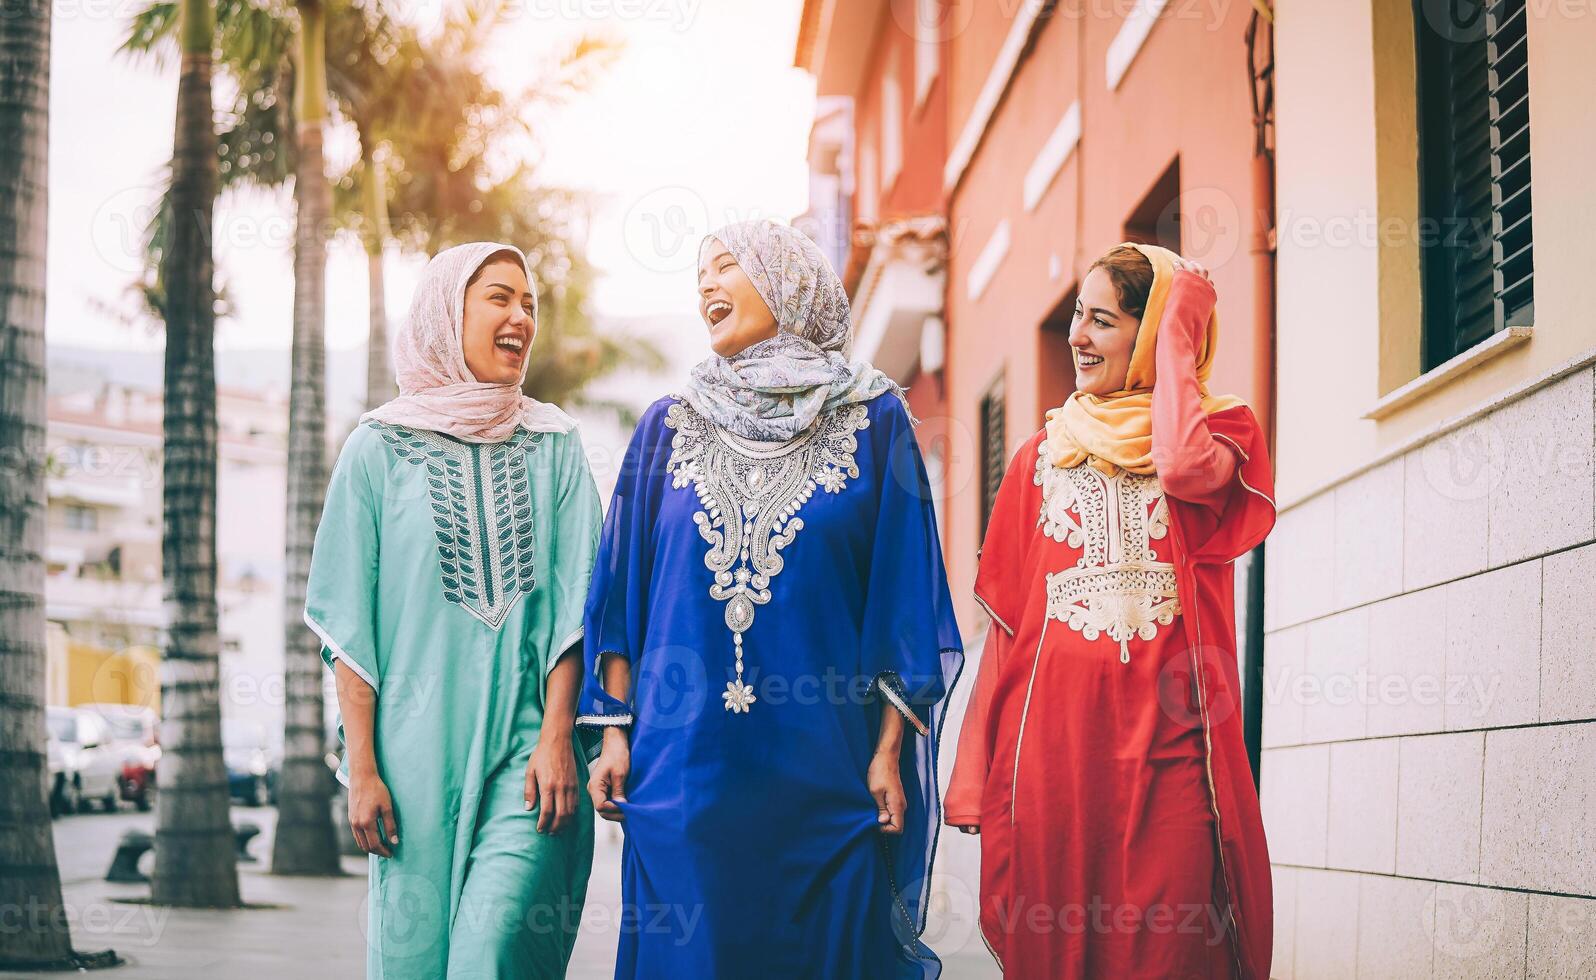 Happy Muslim women walking in the city center - Arabian young girls having fun spending time and laughing together outdoor - concept of people, culture and religion photo